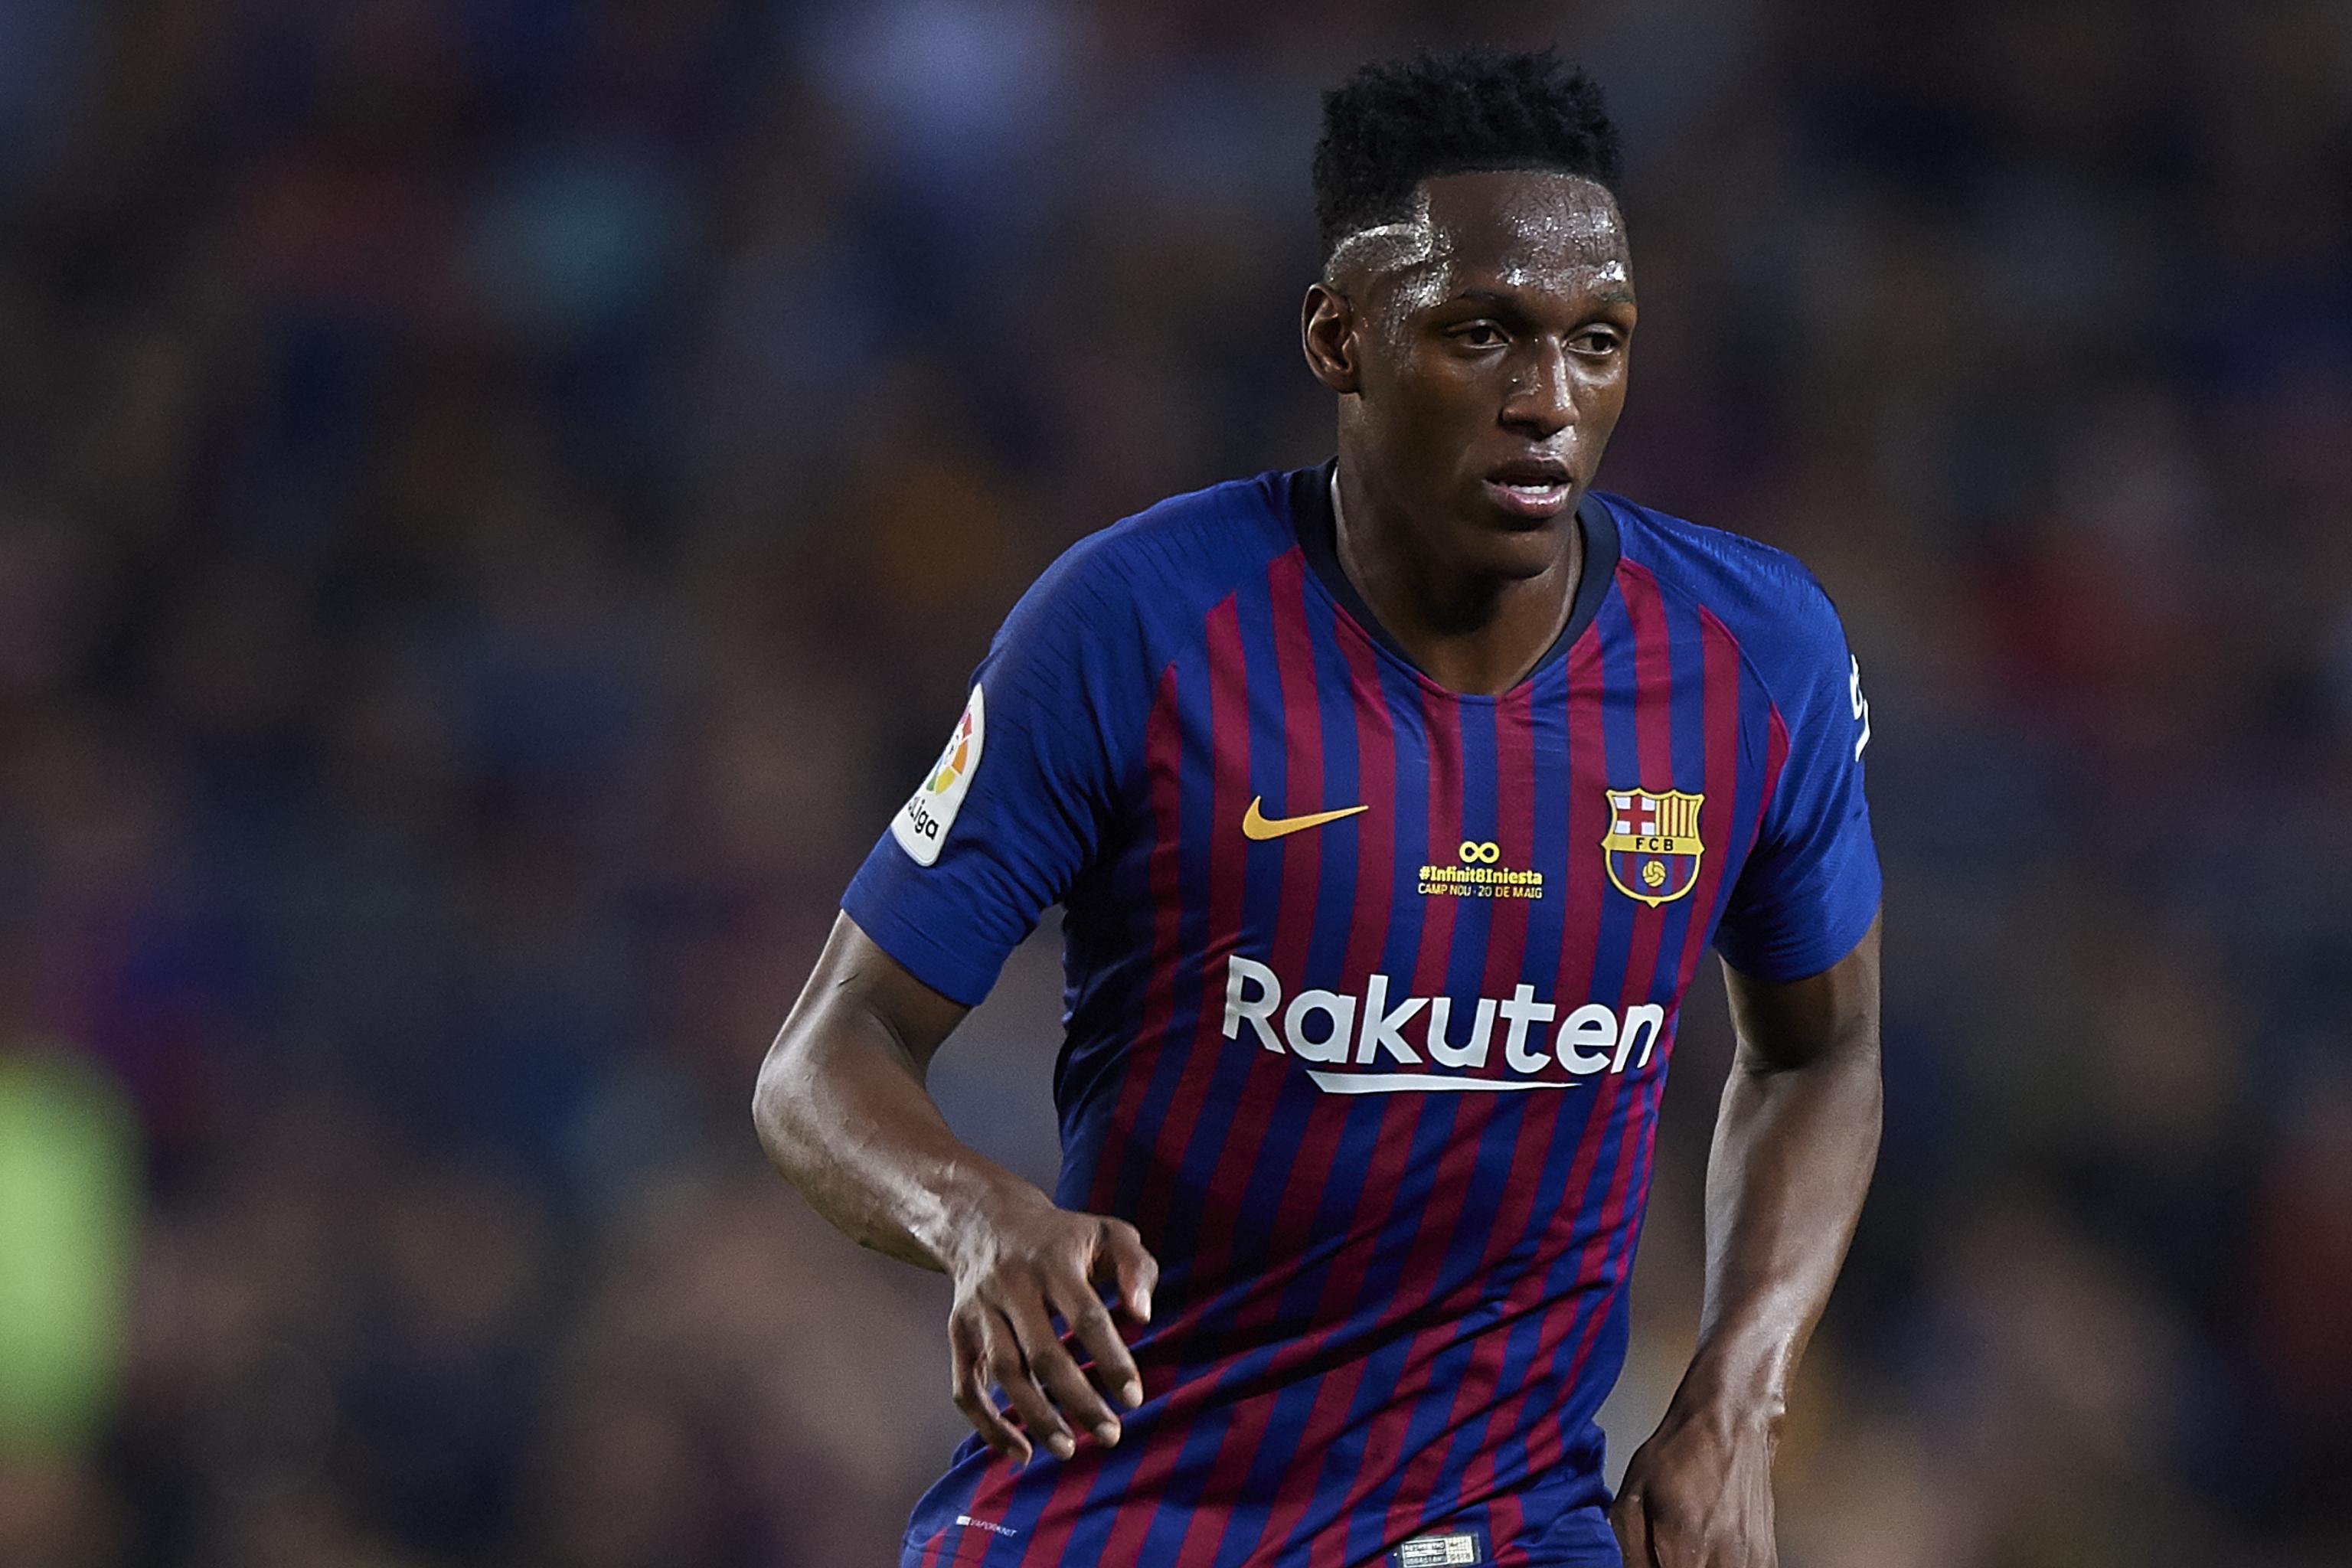 Manchester United Reportedly Make 35m Yerry Mina Bid Want Deal Done Tuesday Bleacher Report Latest News Videos And Highlights